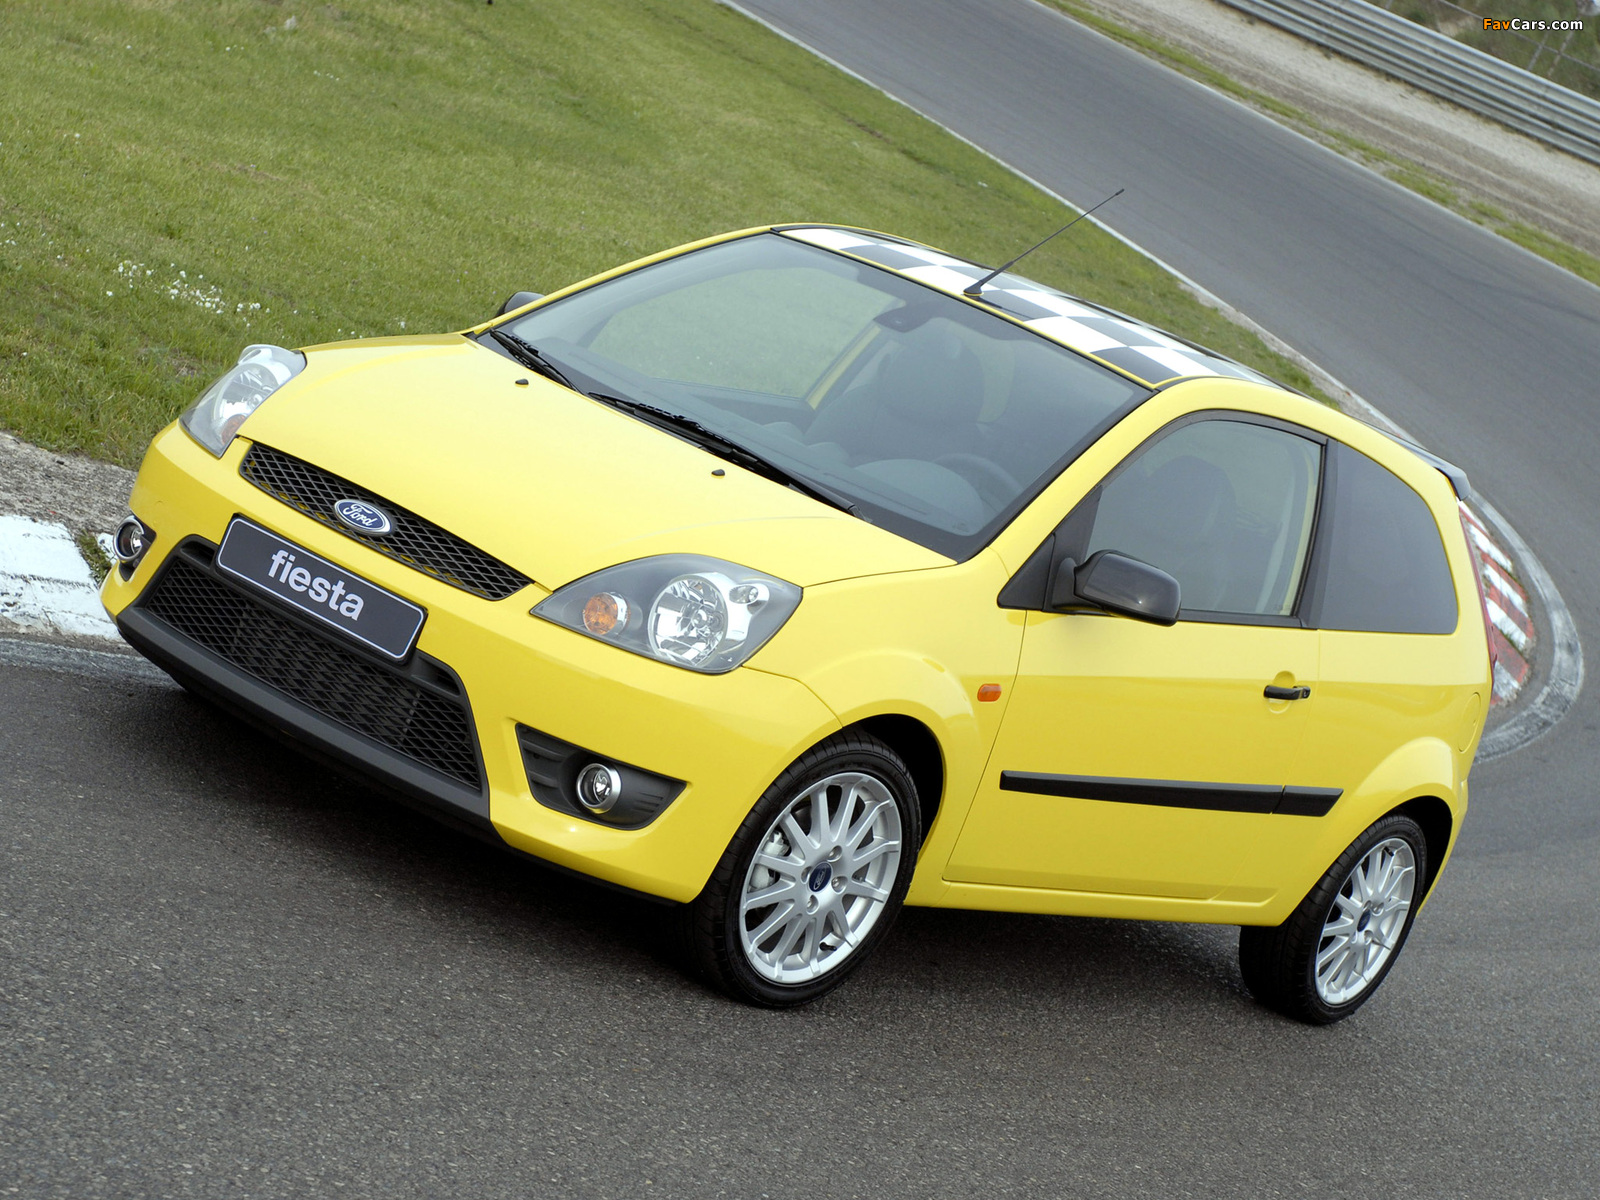 Ford Fiesta Ultimate Edition 2006 pictures (1600 x 1200)